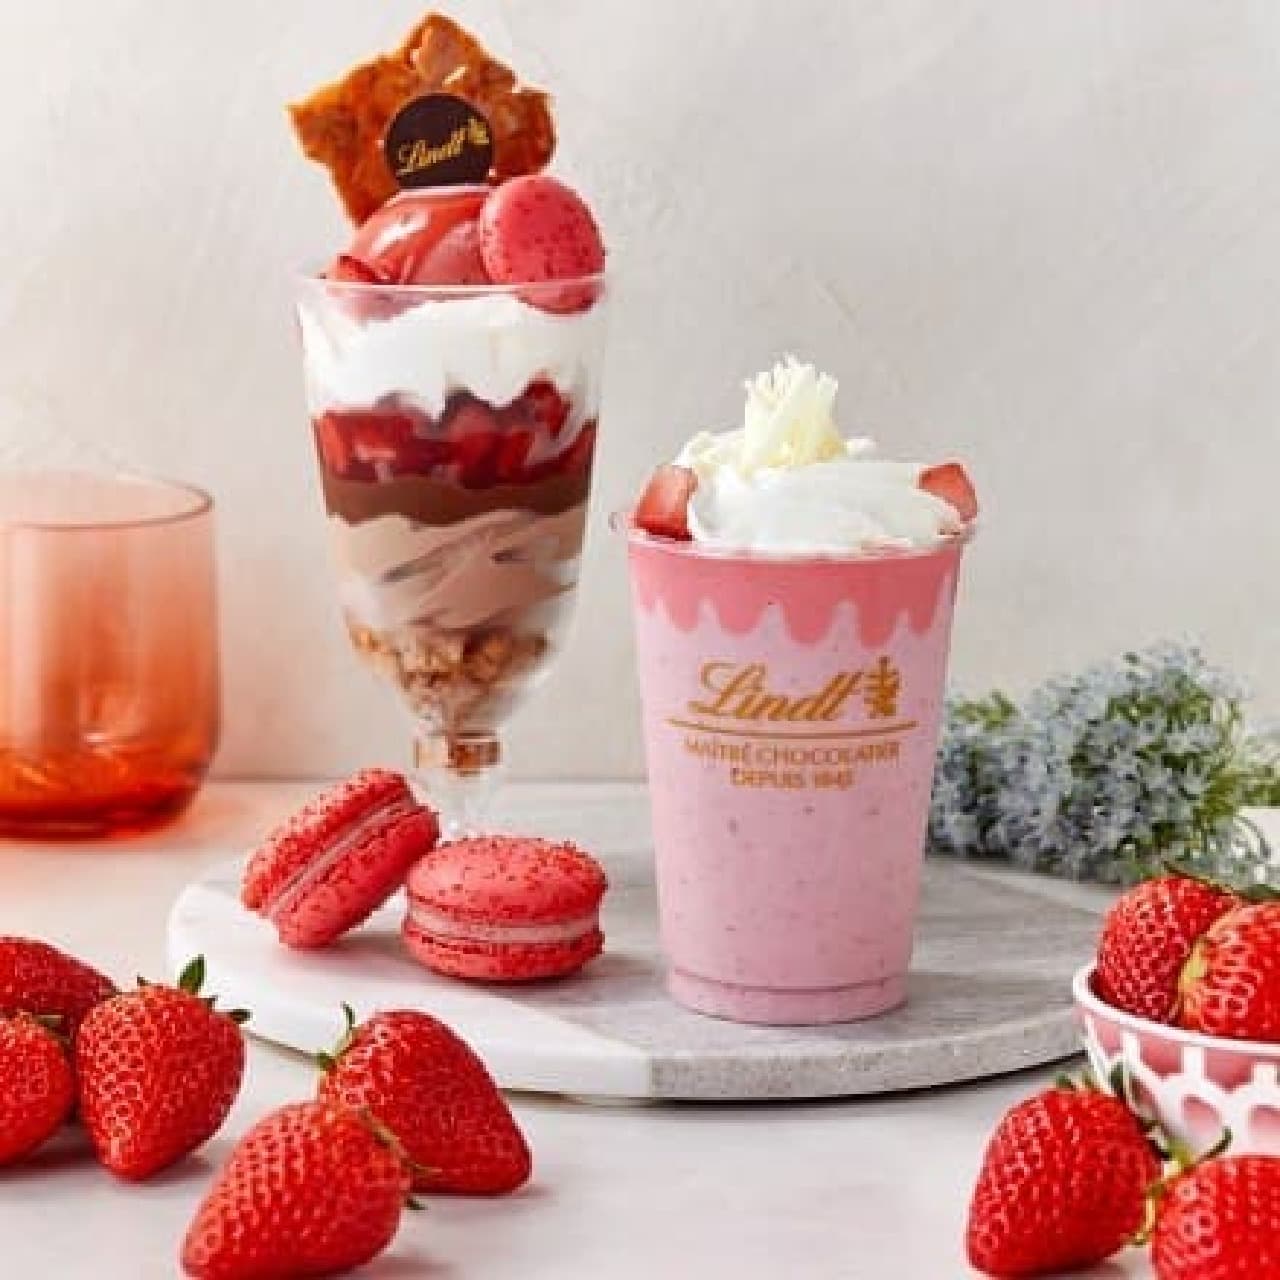 "Lindt Strawberry White Chocolate Ice Drink" "Lindt Strawberry Chocolat Parfait"